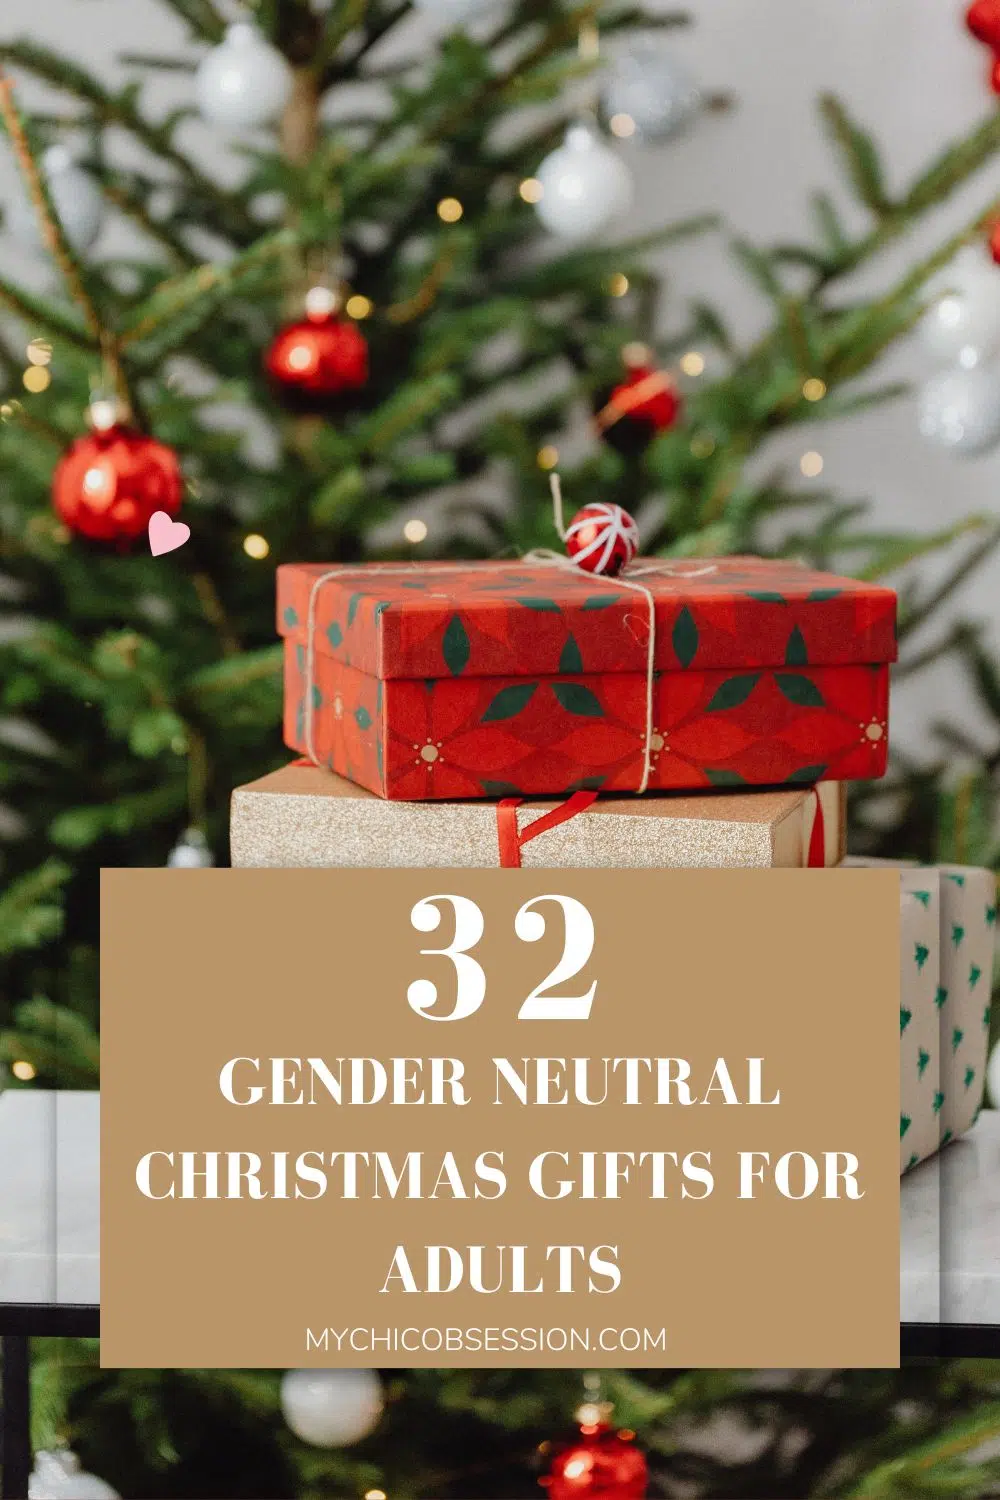 Gender neutral Christmas gift ideas for adults